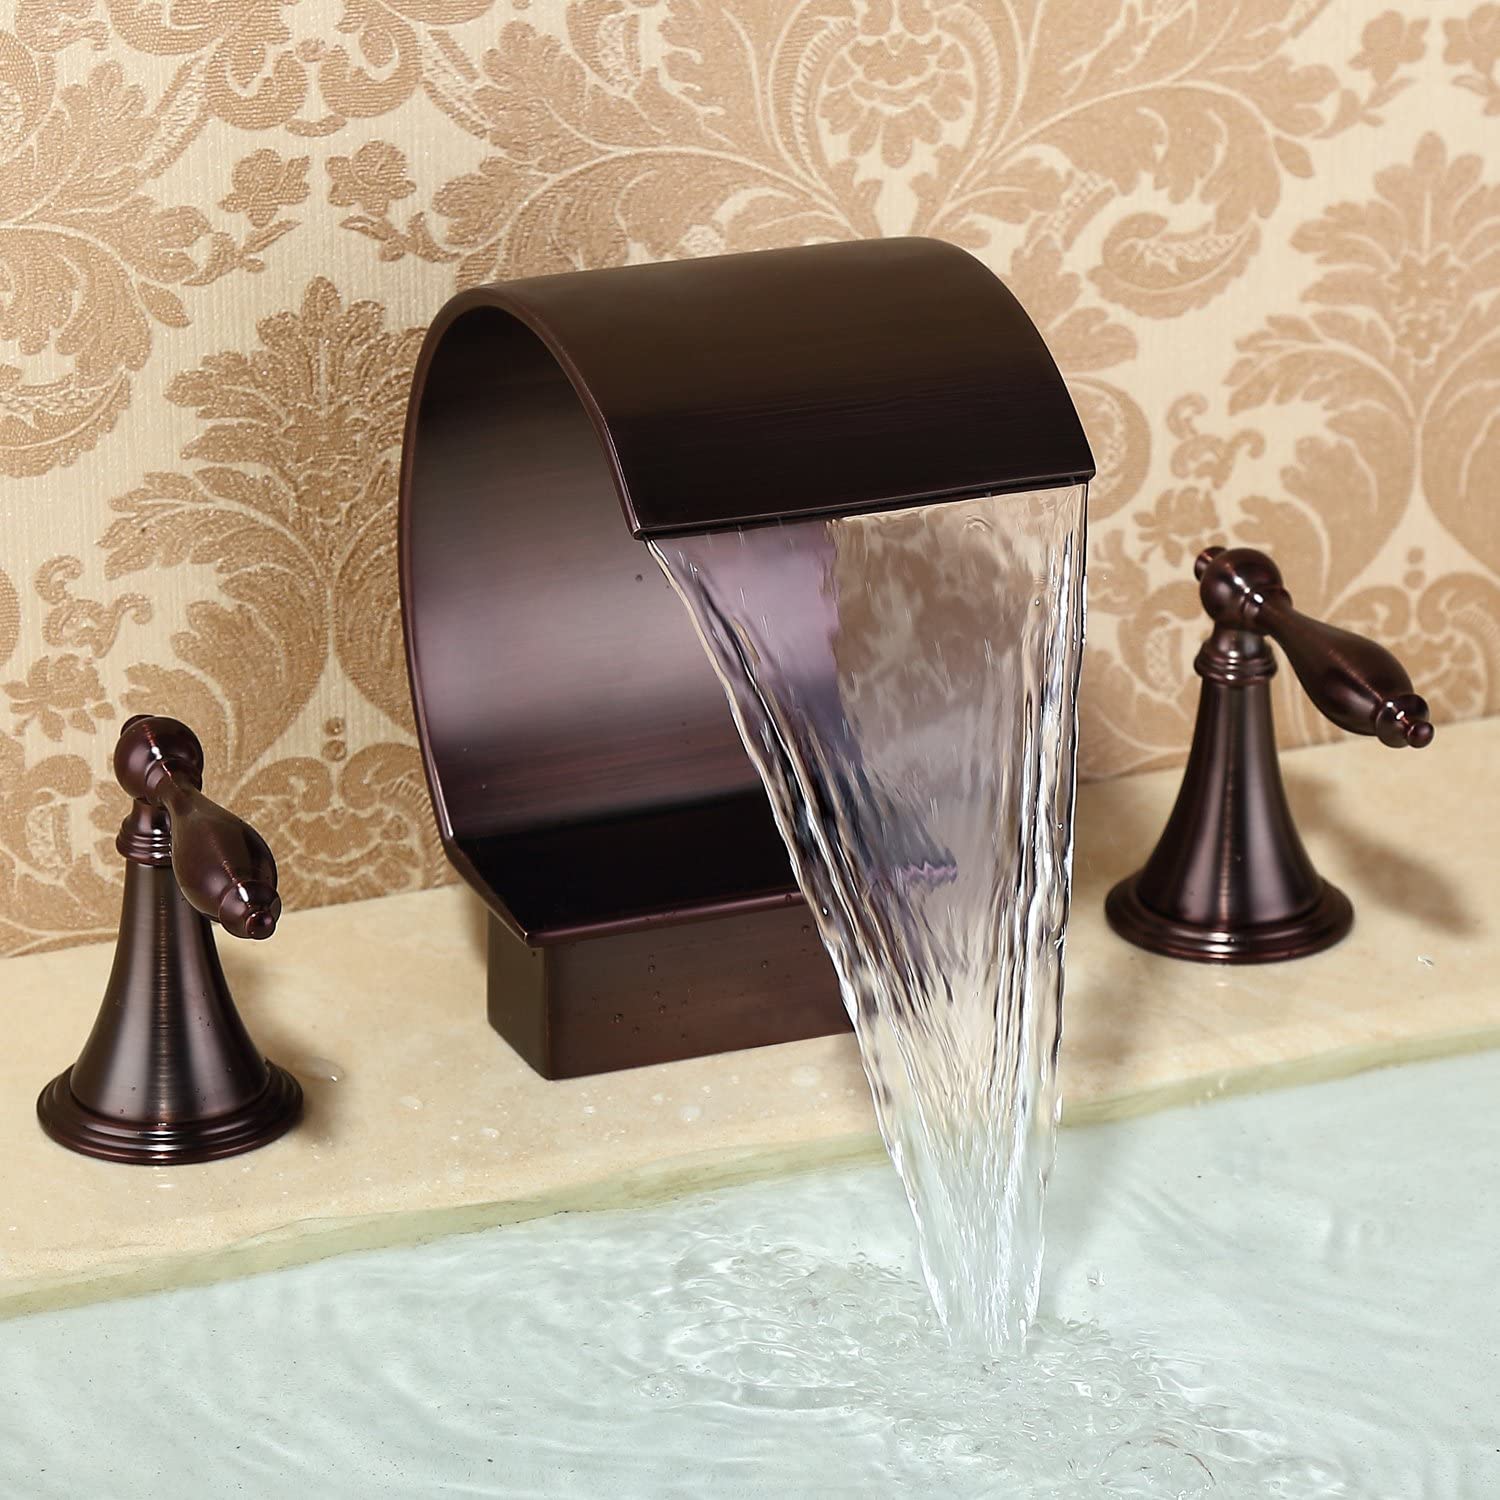 Waterfall Oil-rubbed Bronze Faucet High Arc Sink Faucet ...